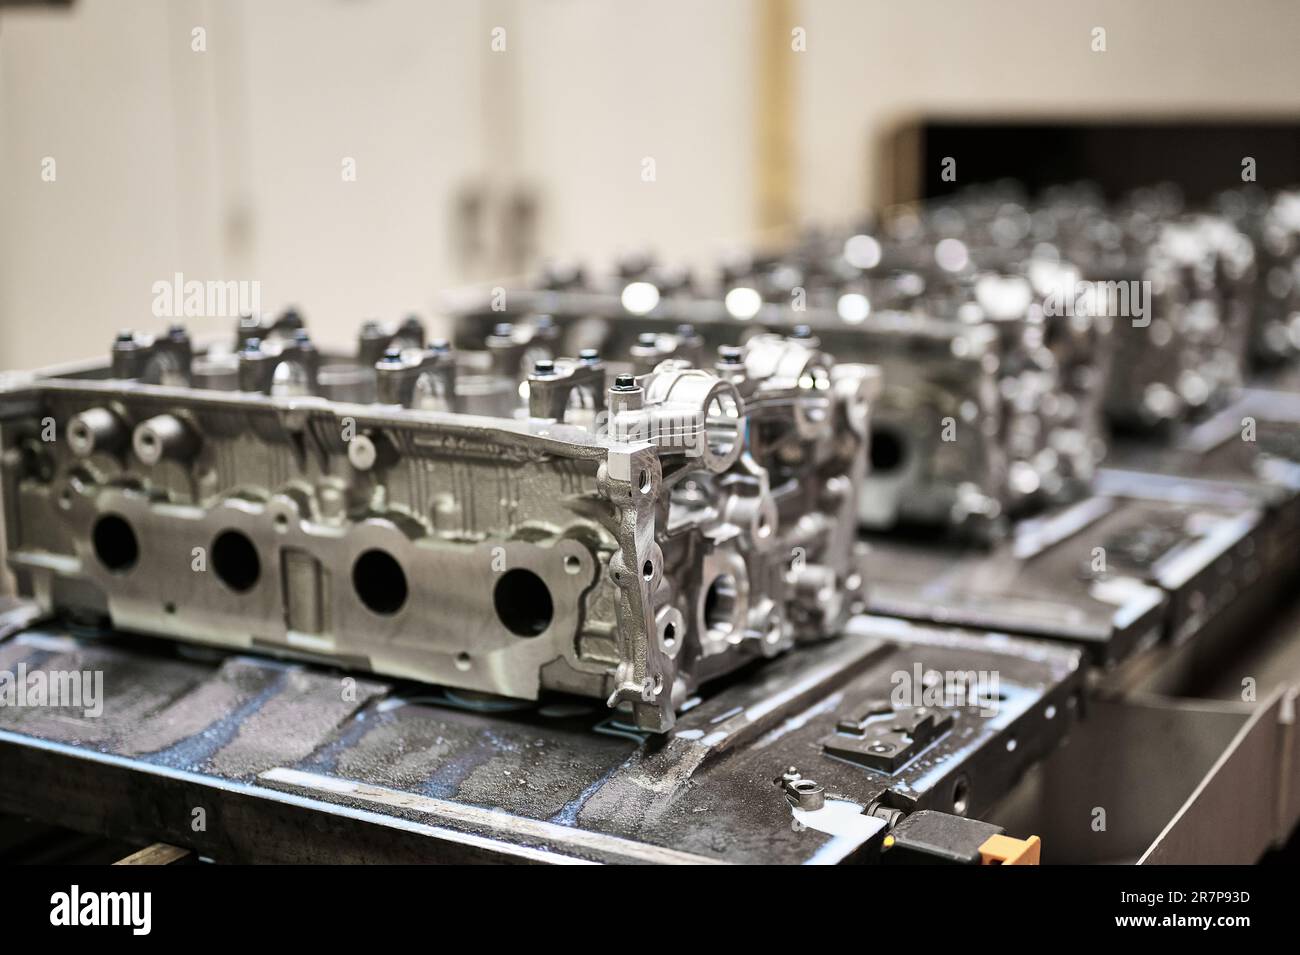 Cylinder heads of automobile engine ready for installation Stock Photo